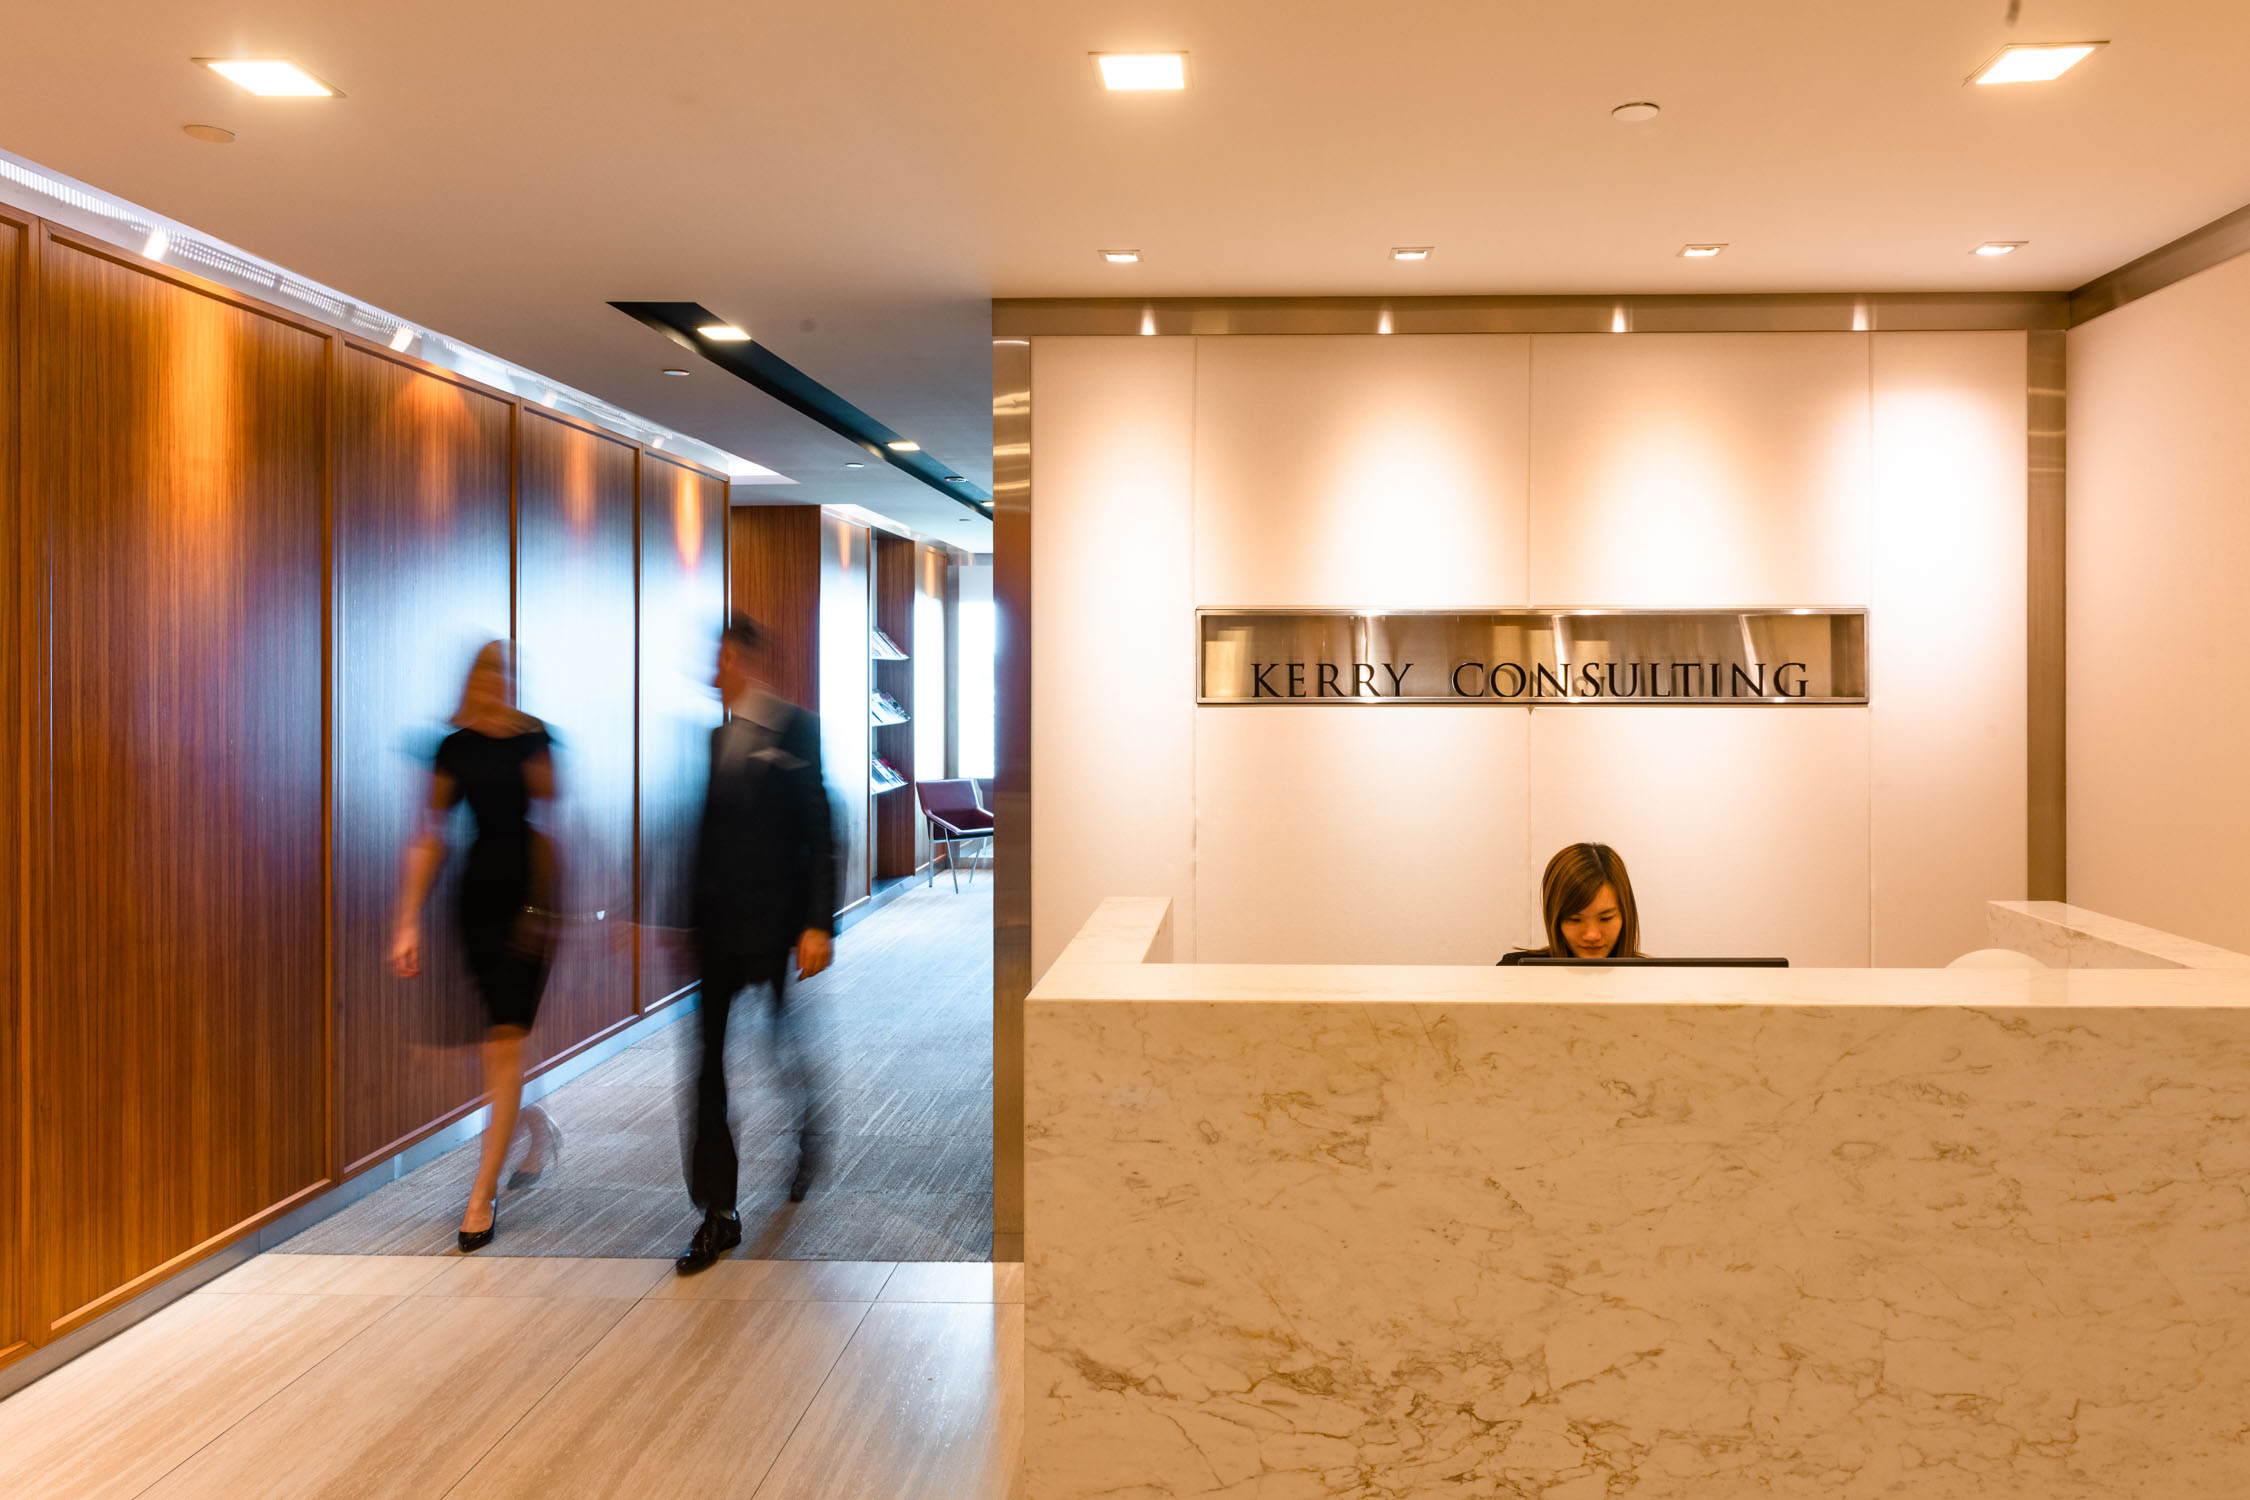 Long exposure shot of two people in business formal wear walking past company signage at reception area, a woman (receptionist) sitting down at the desk